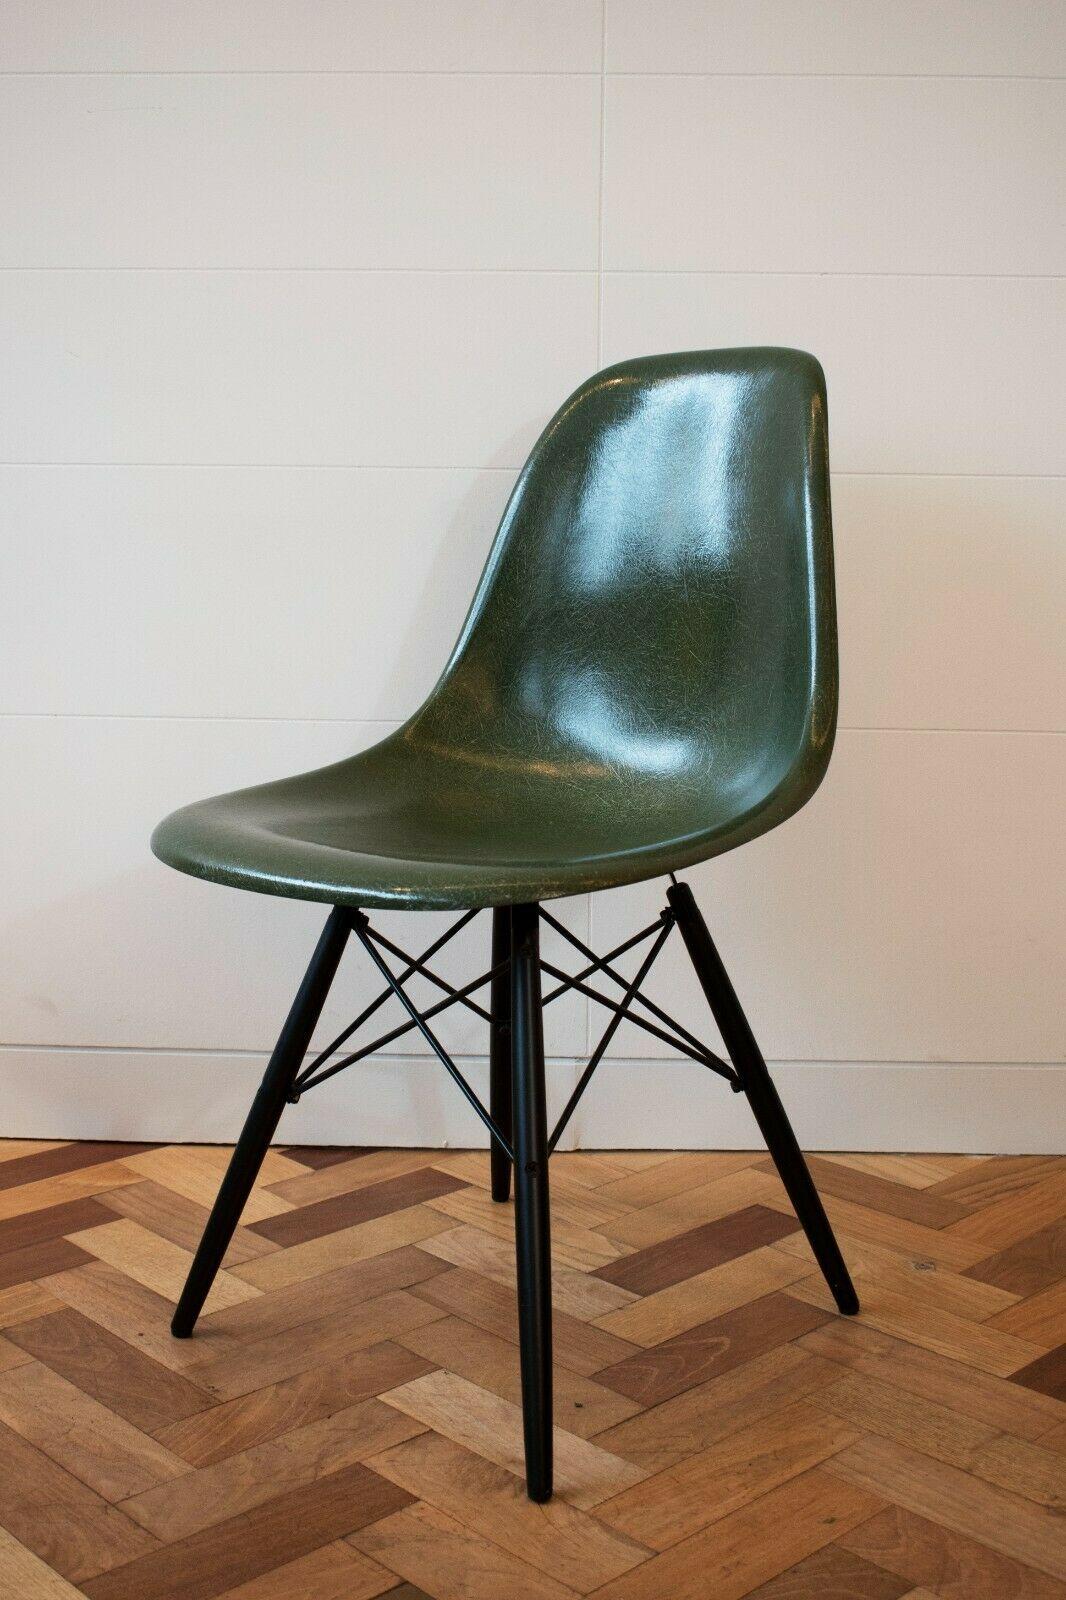 Set of 8 1960s Fibreglass Chairs by Charles and Ray Eames for Herman Miller 2